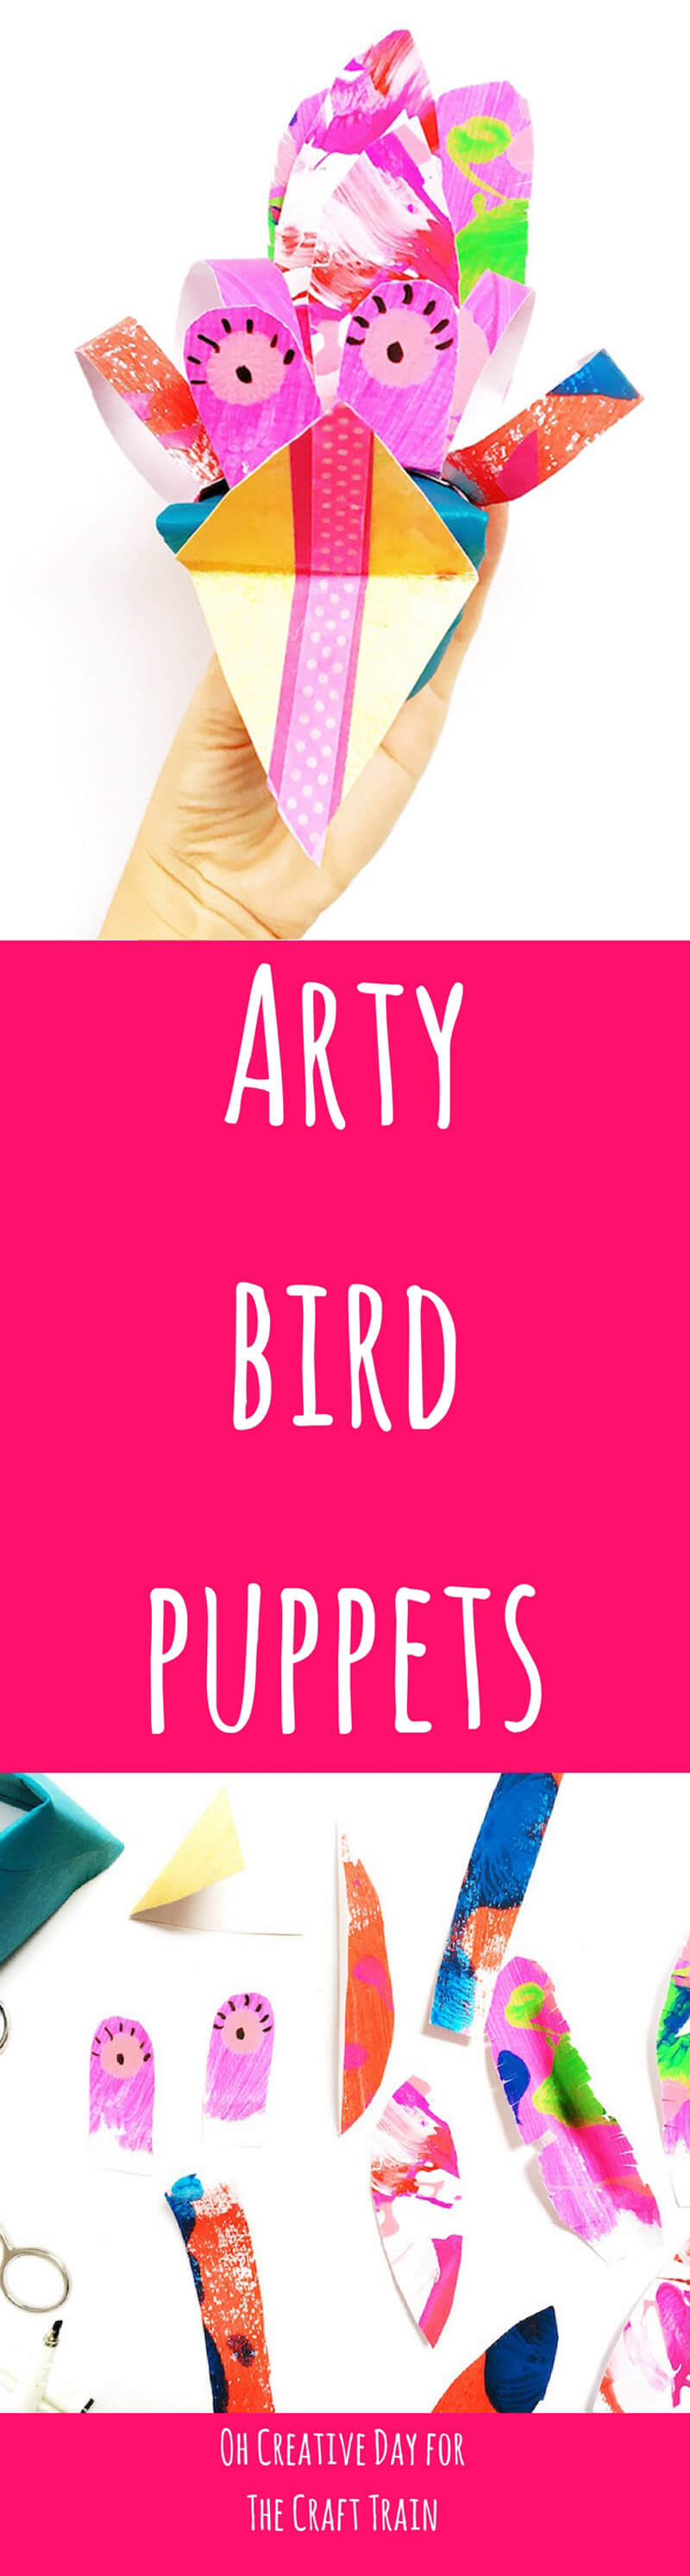 Arty bird puppets - make use of old artwork with this adorable paper bird puppet craft!